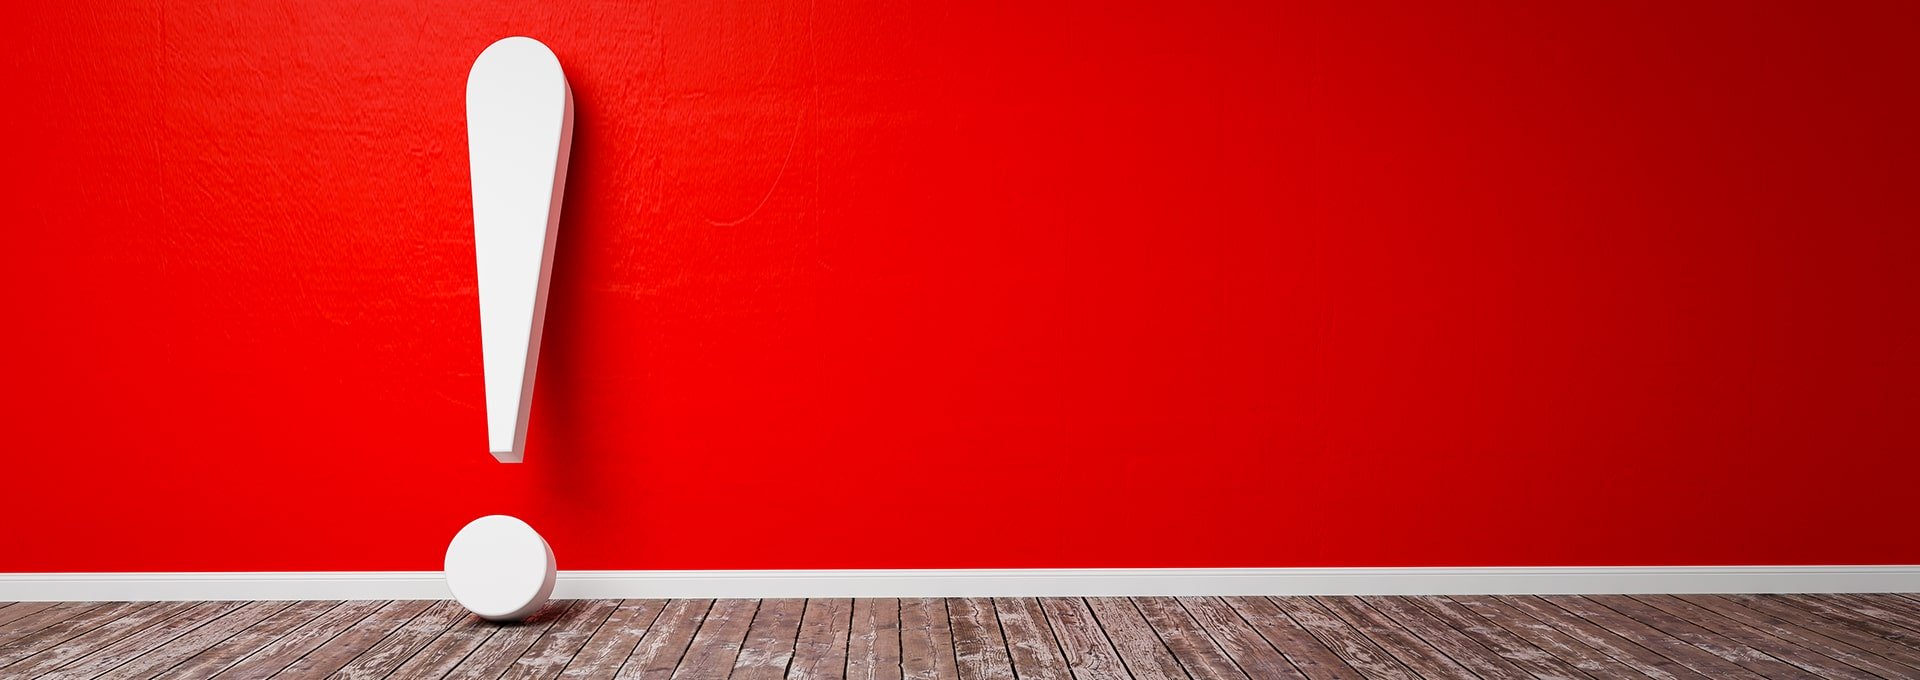 White exclamation mark on a red background